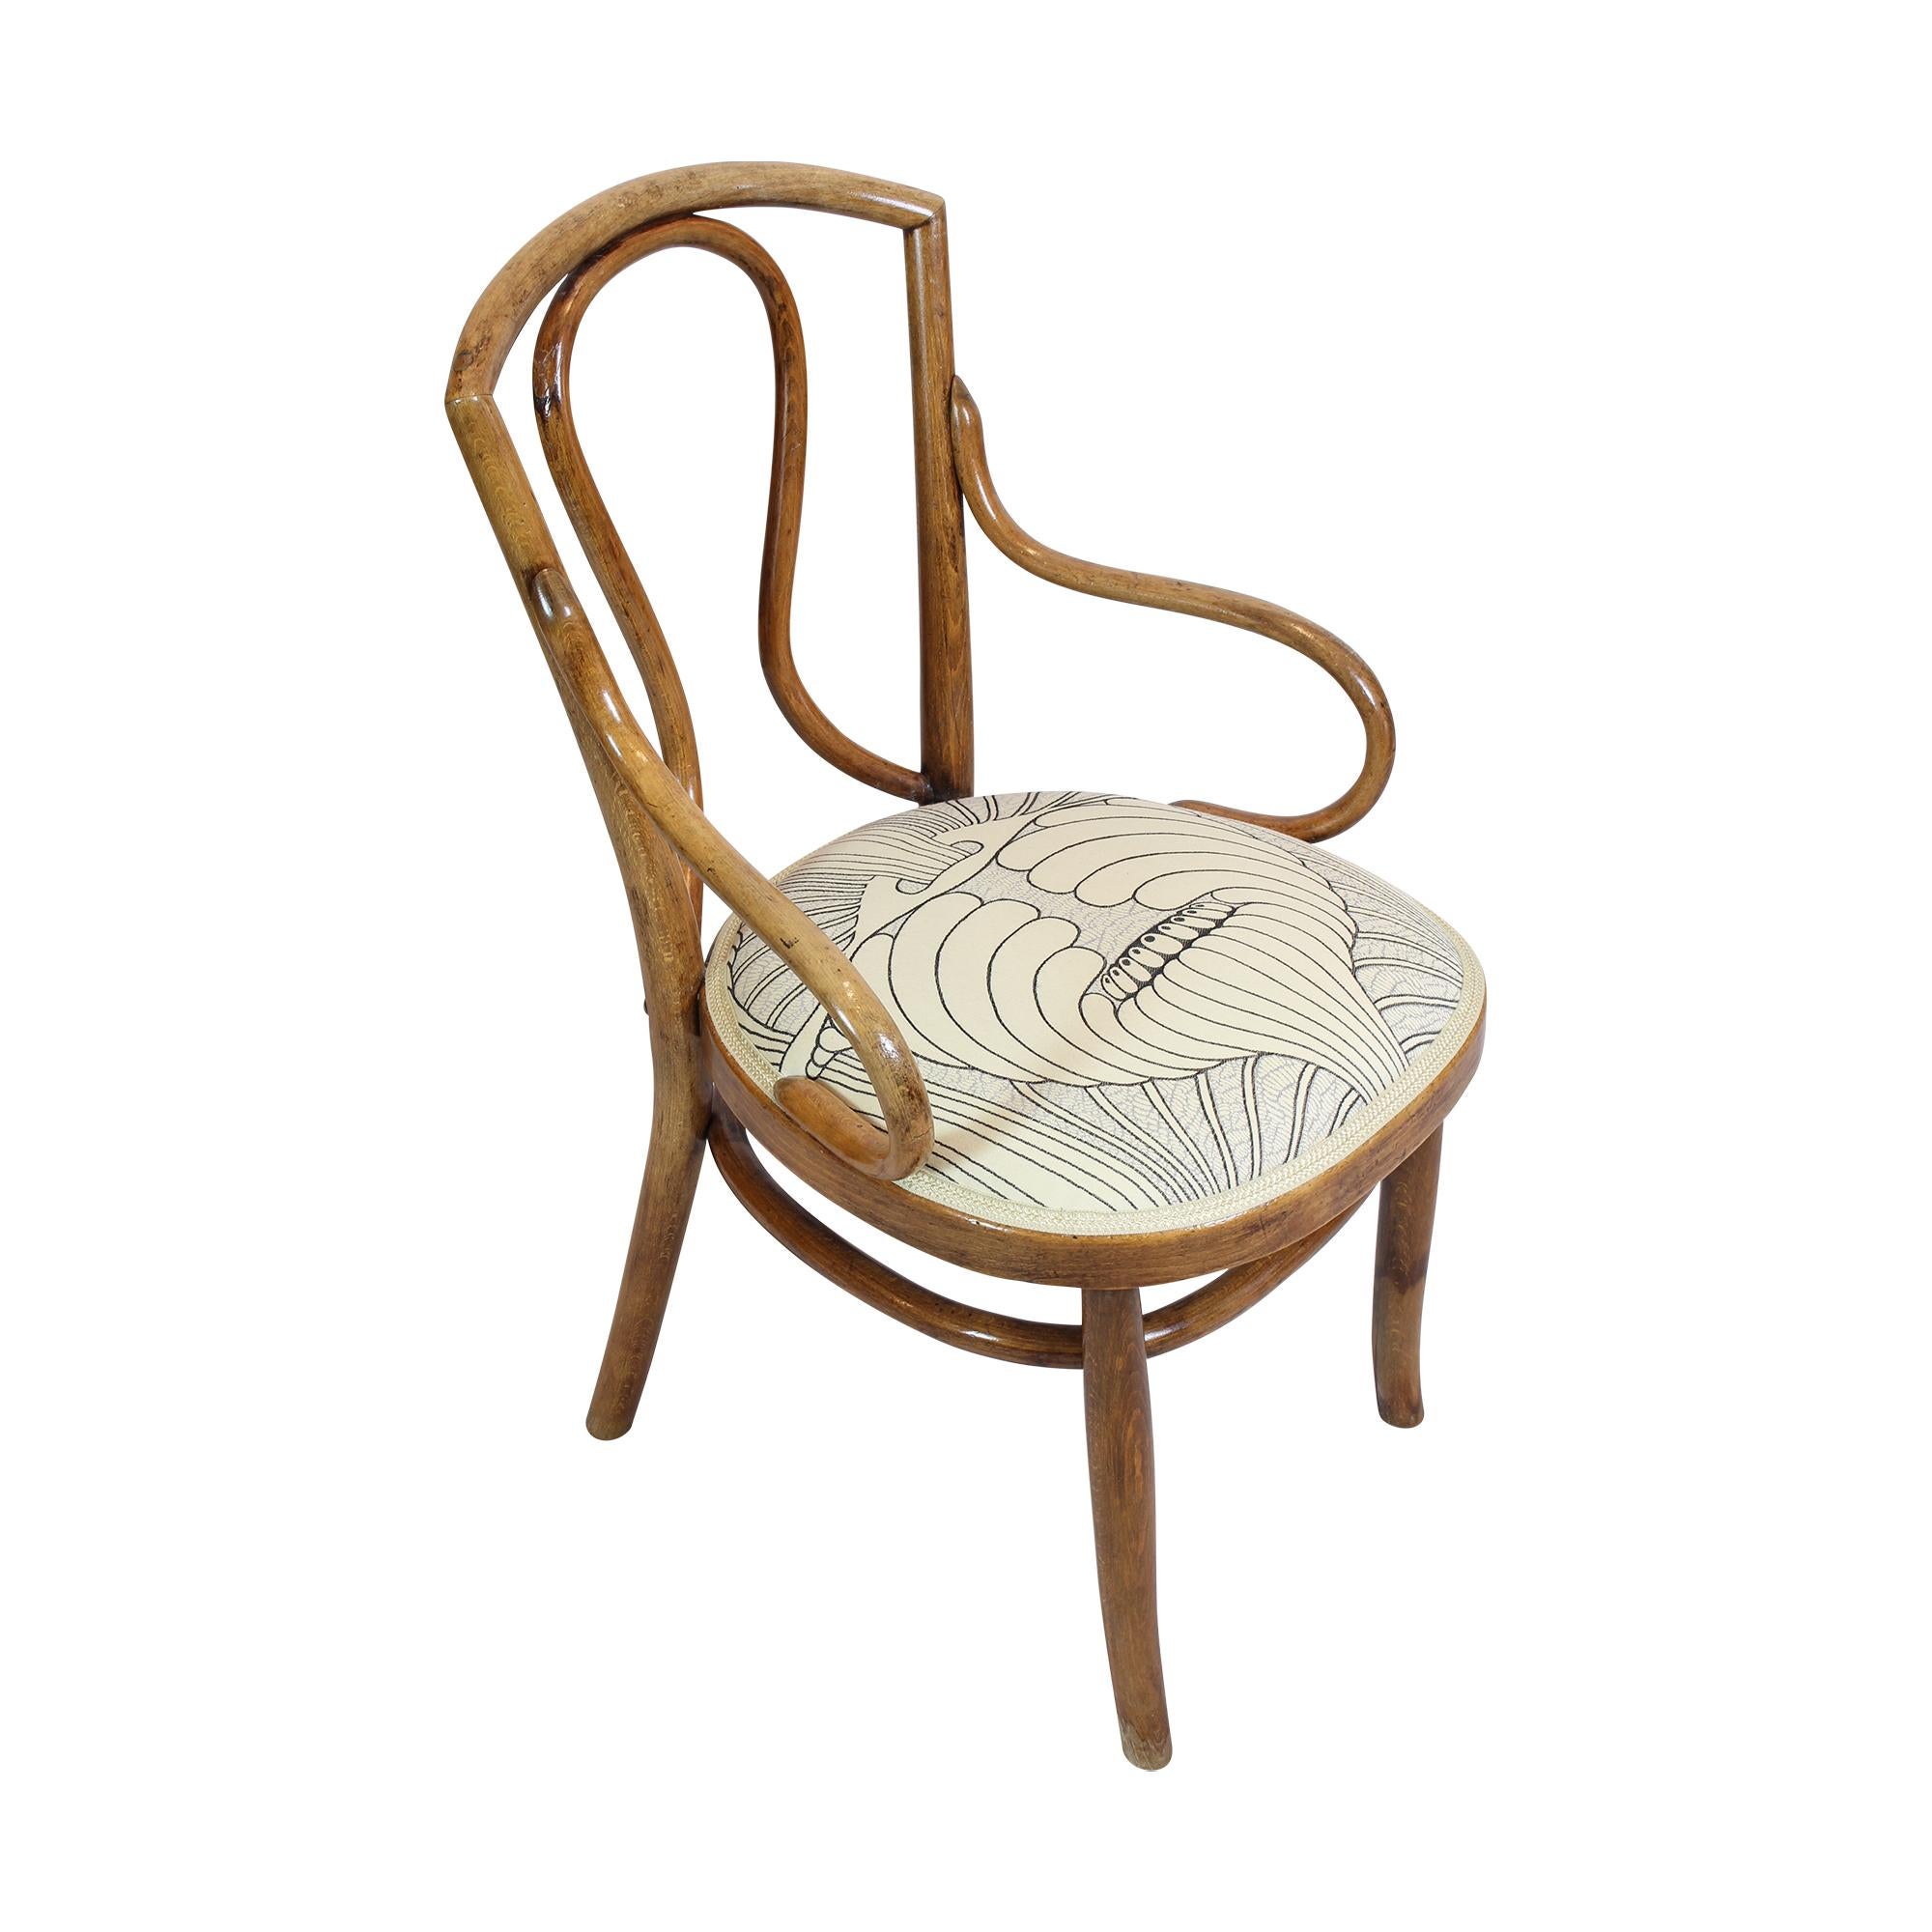 The art nouveau armchair was made of bentwood. The seat has been reupholstered and covered with a very beautiful Art Nouveau fabric.  The chair is reminiscent of Thonet chairs, but no label or stamp is visible. The chair is in a good restored